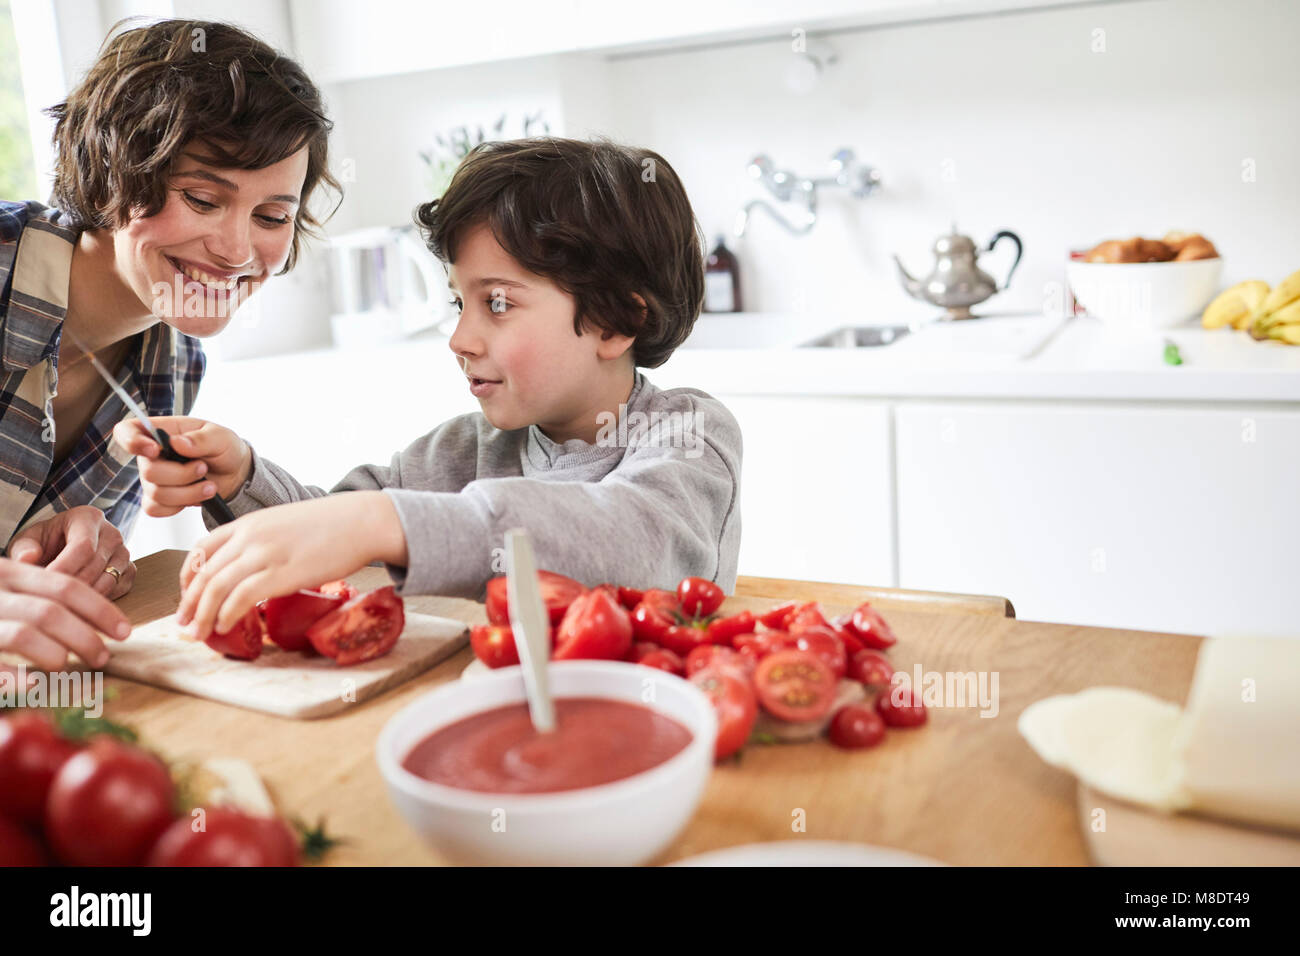 Mother and son preparing food in kitchen Stock Photo